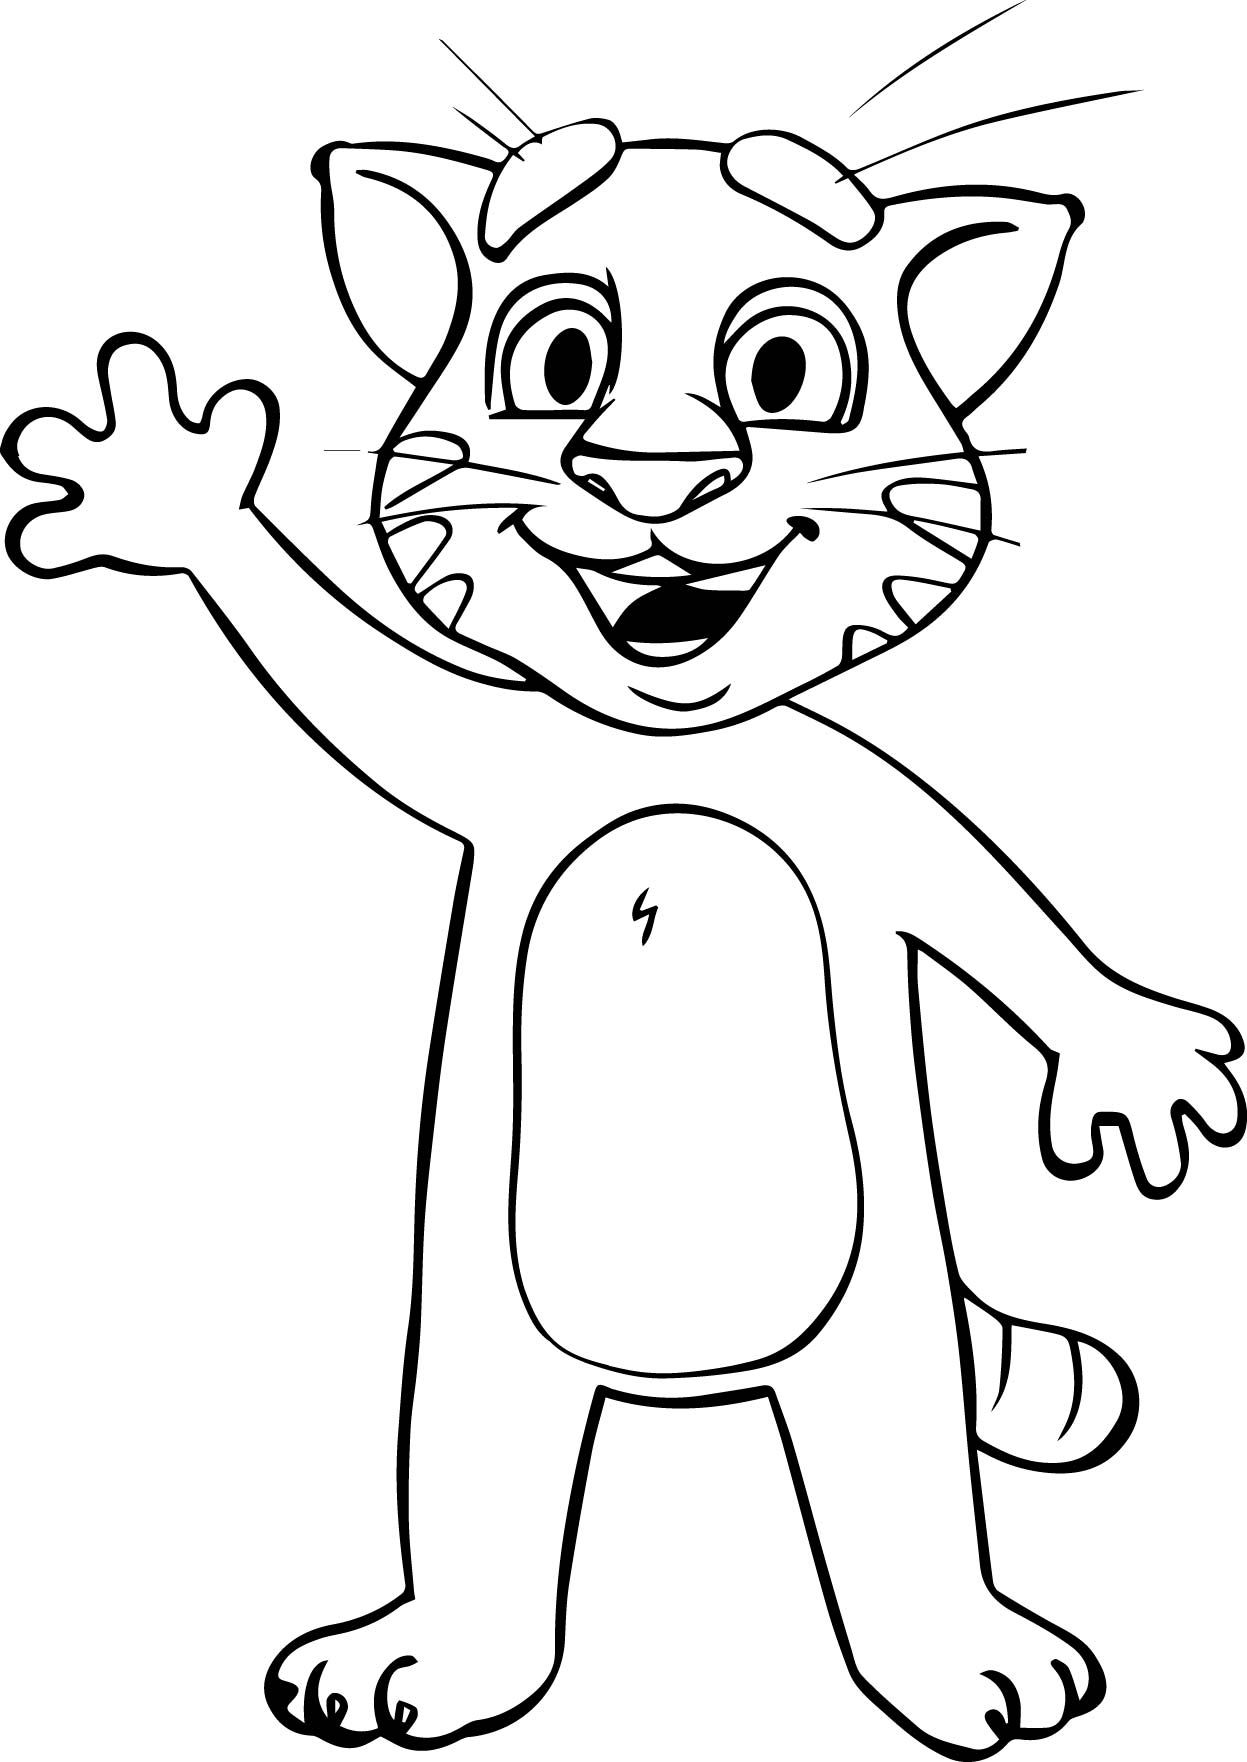 Printable Talking Tom And Friends Coloring Page for kids.